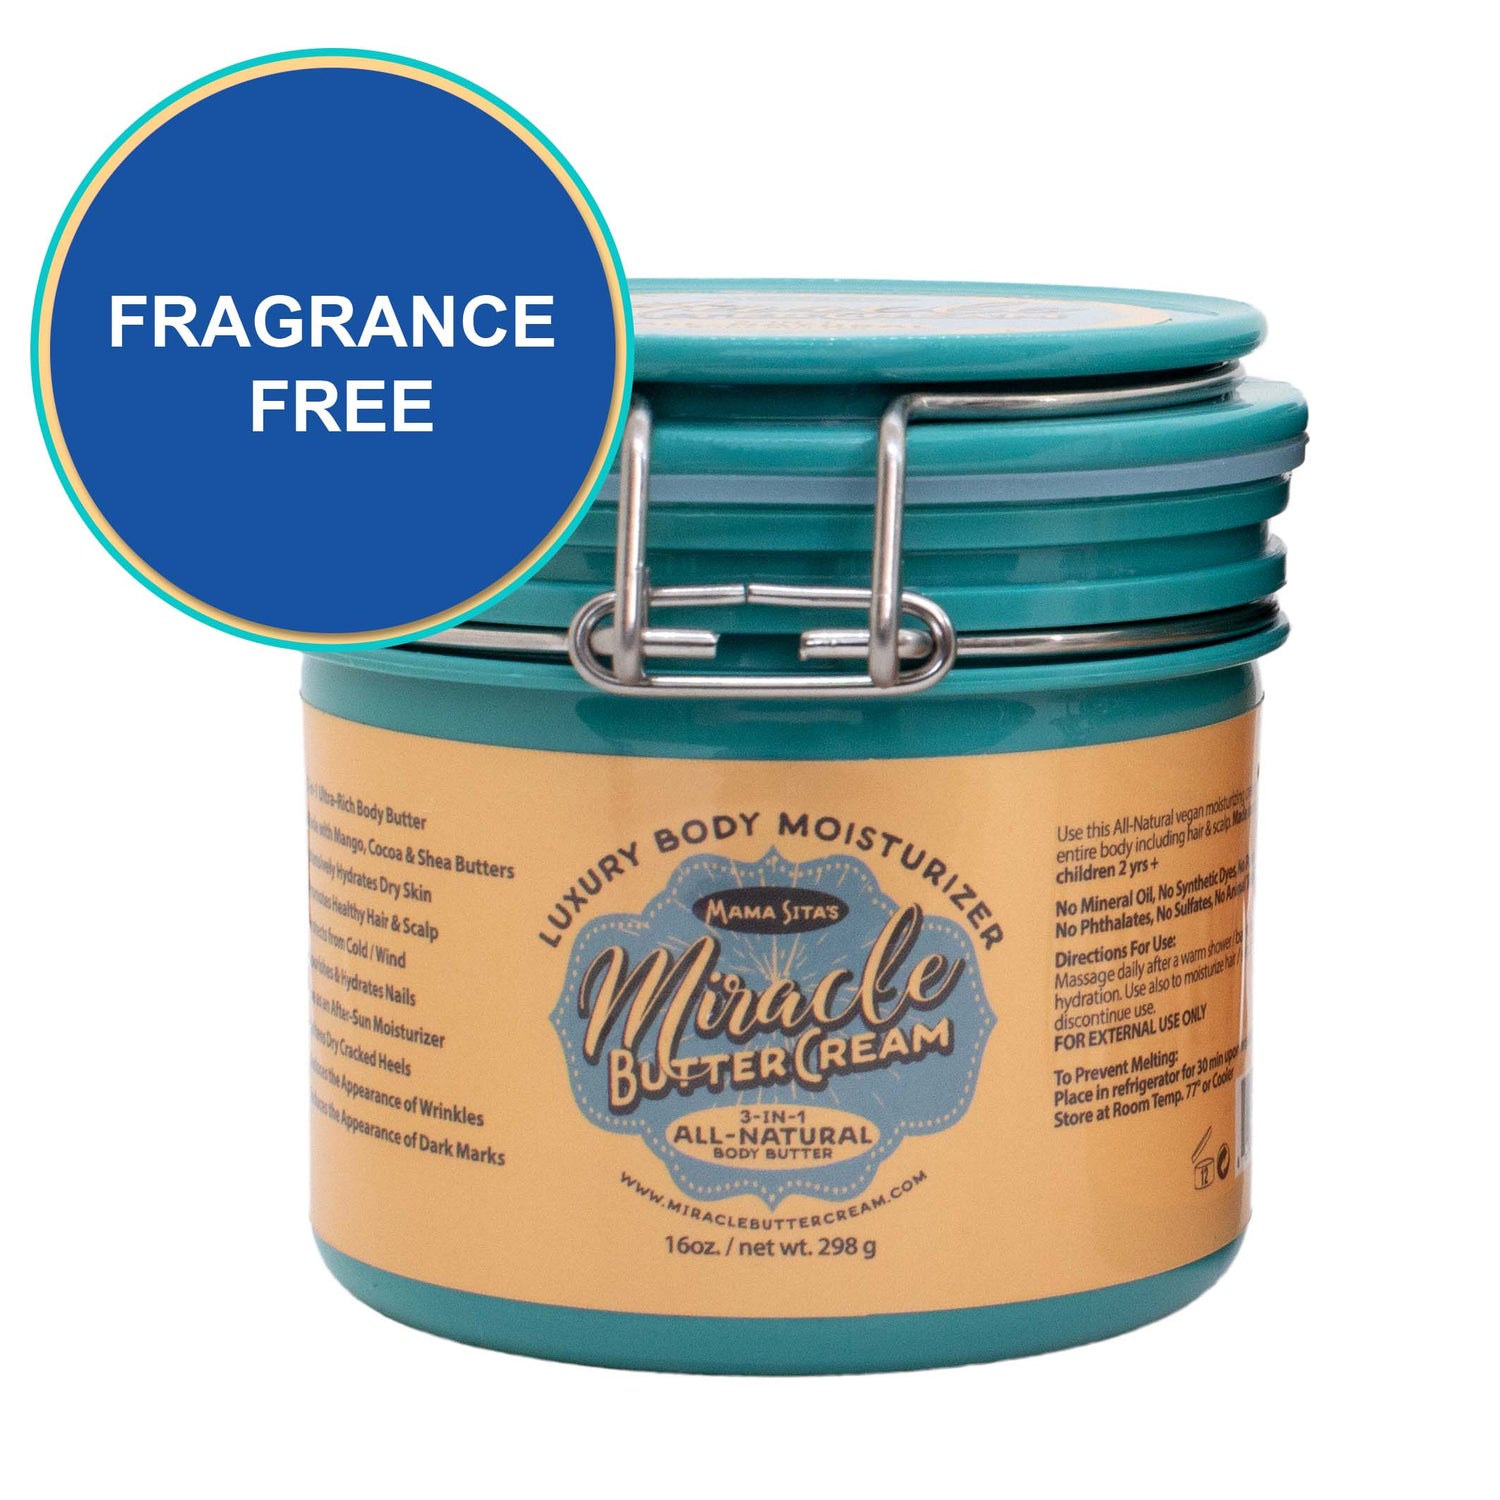 (Natural) Unscented/Fragrance-Free Miracle Butter Cream. miraclebuttercream.com